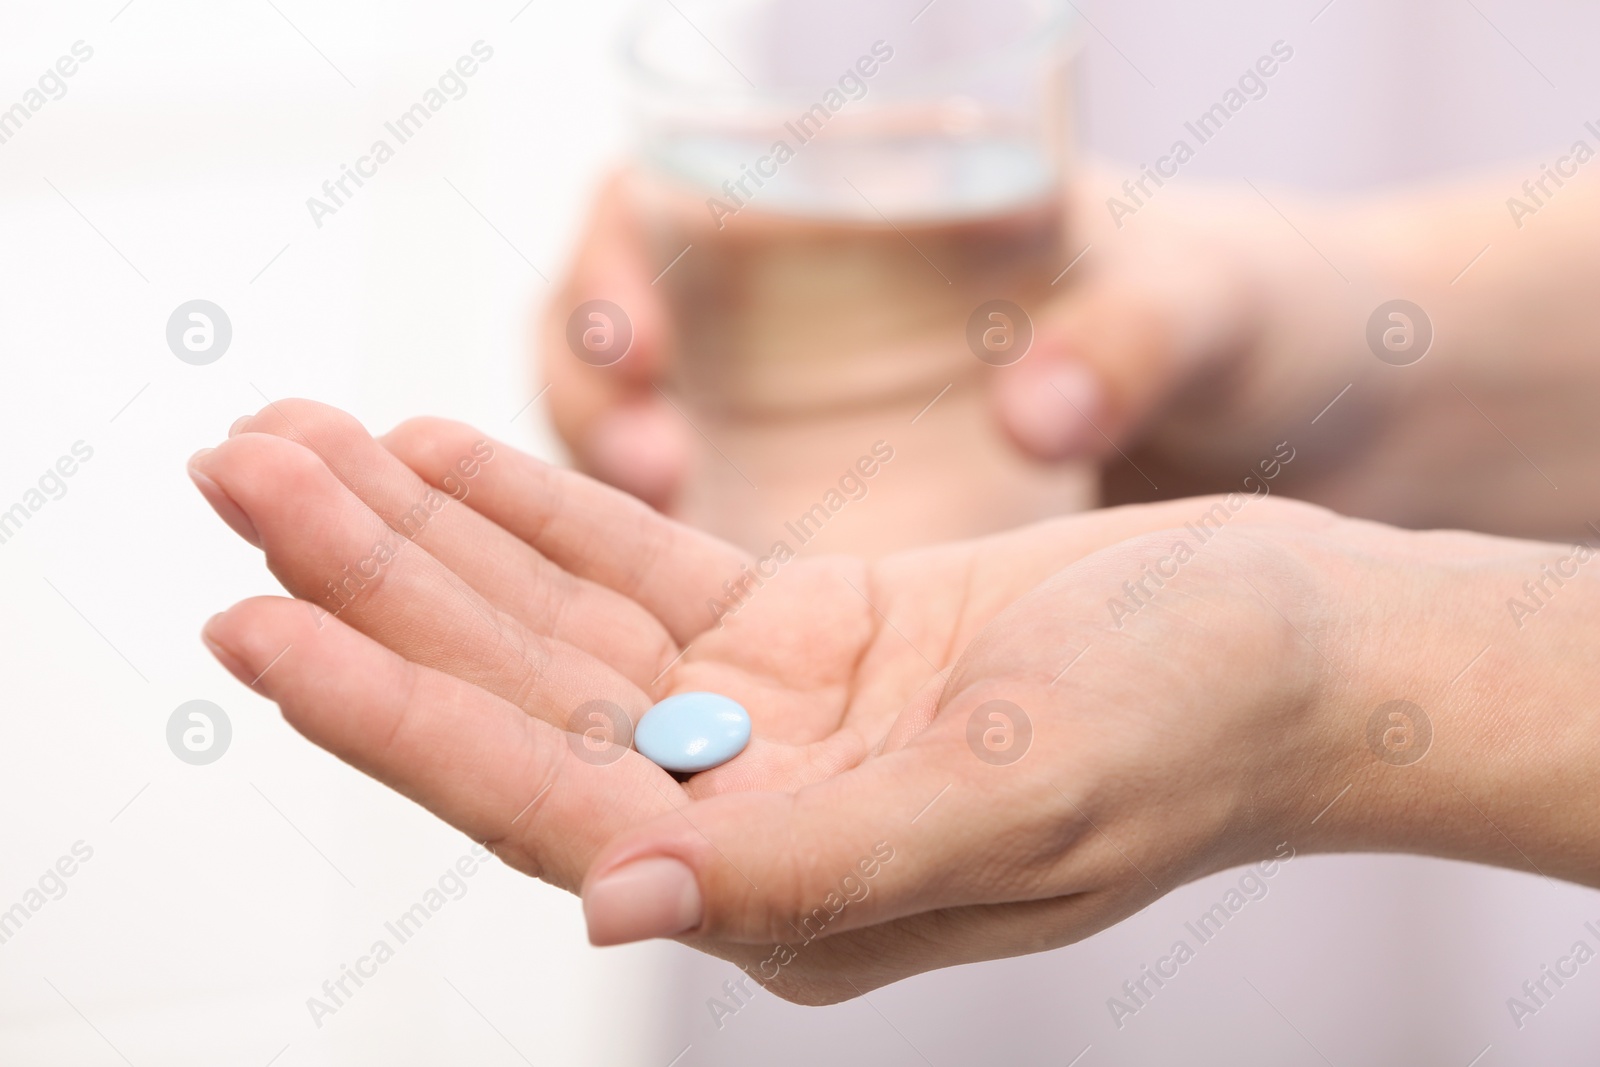 Photo of Woman holding pill and glass of water on blurred background, closeup. Space for text